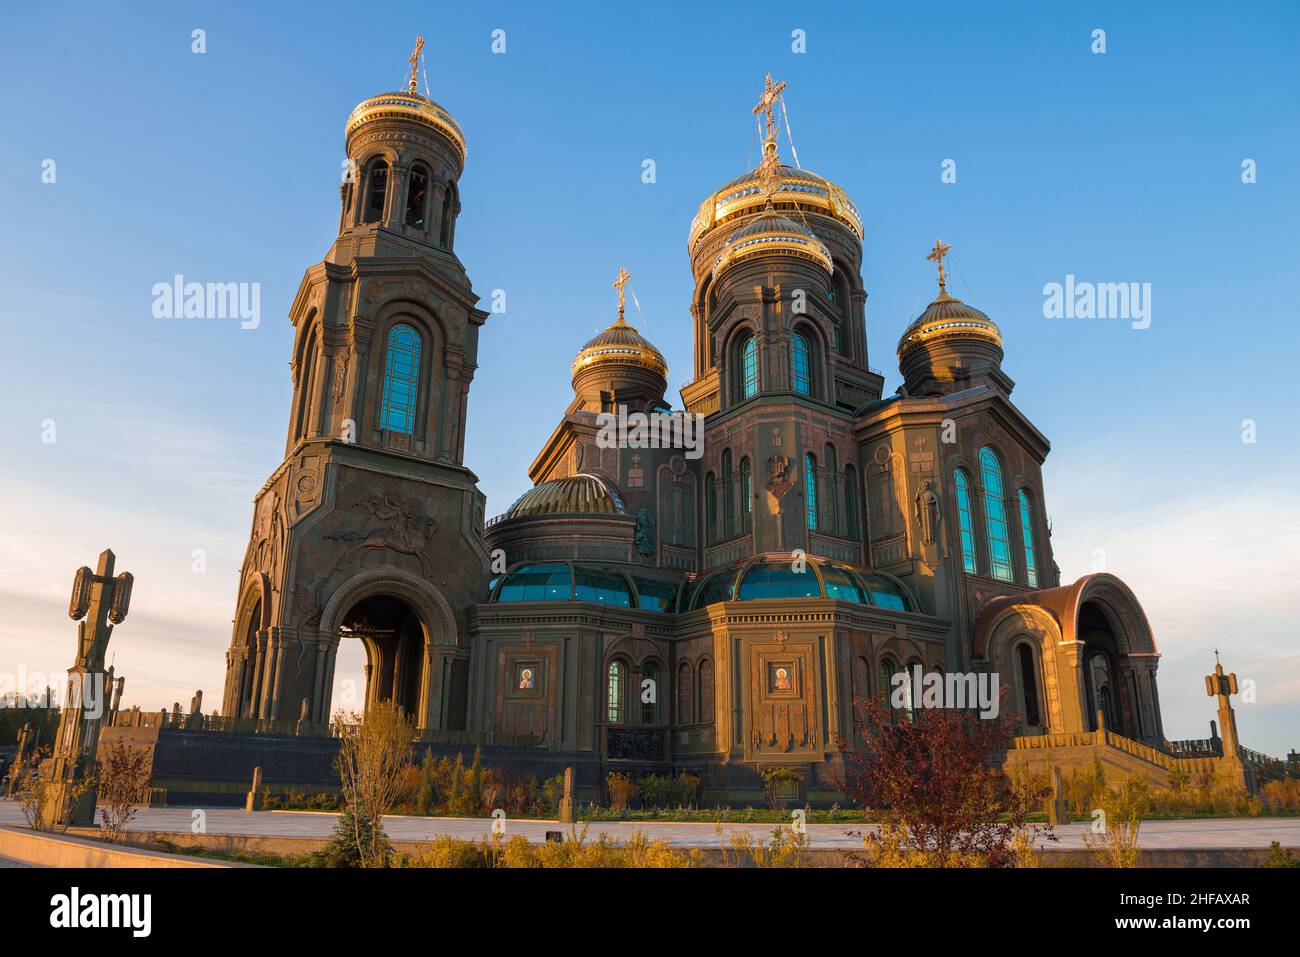 MOSCOW REGION, RUSSIA - AUGUST 25, 2020: The main temple of the Armed Forces of the Russian Federation close-up on a sunny August evening. Patriot Par Stock Photo